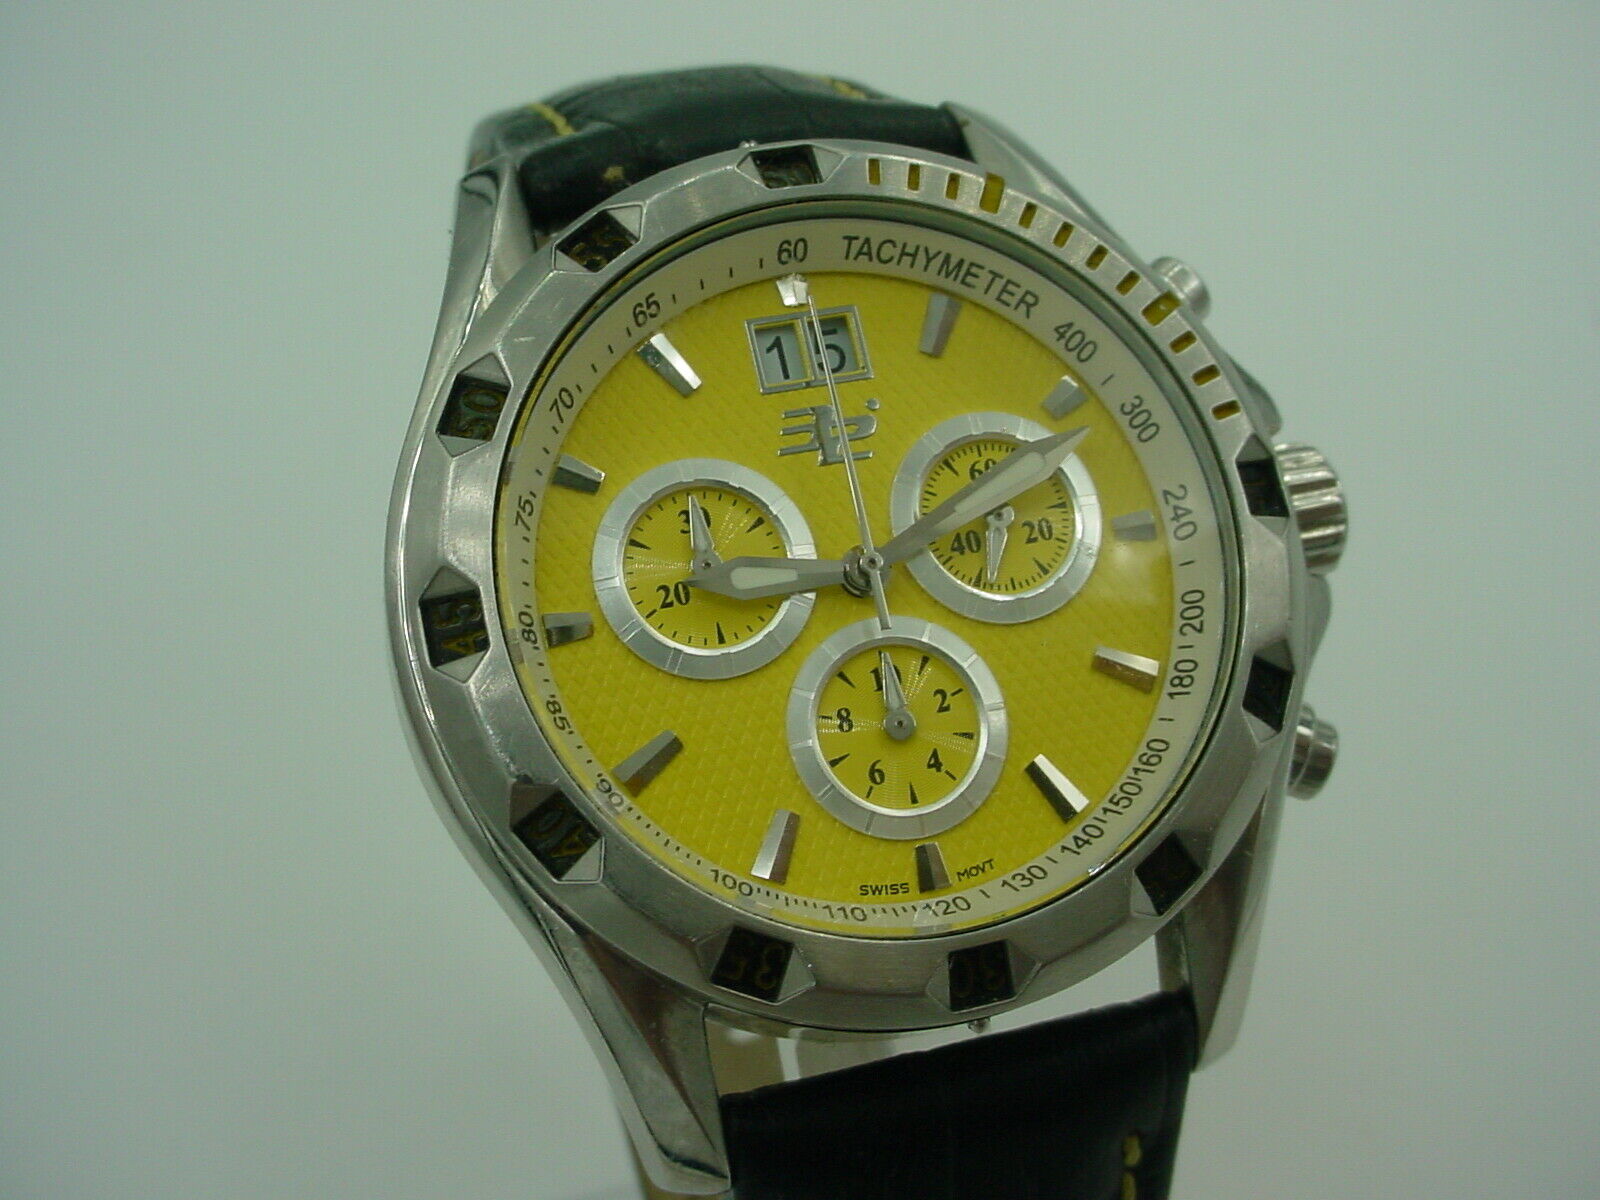 MENS 32 DEGREEs CHRONOGRAPH BRIGHT YELLOW DIAL WRIST WATCH, EXCELLENT